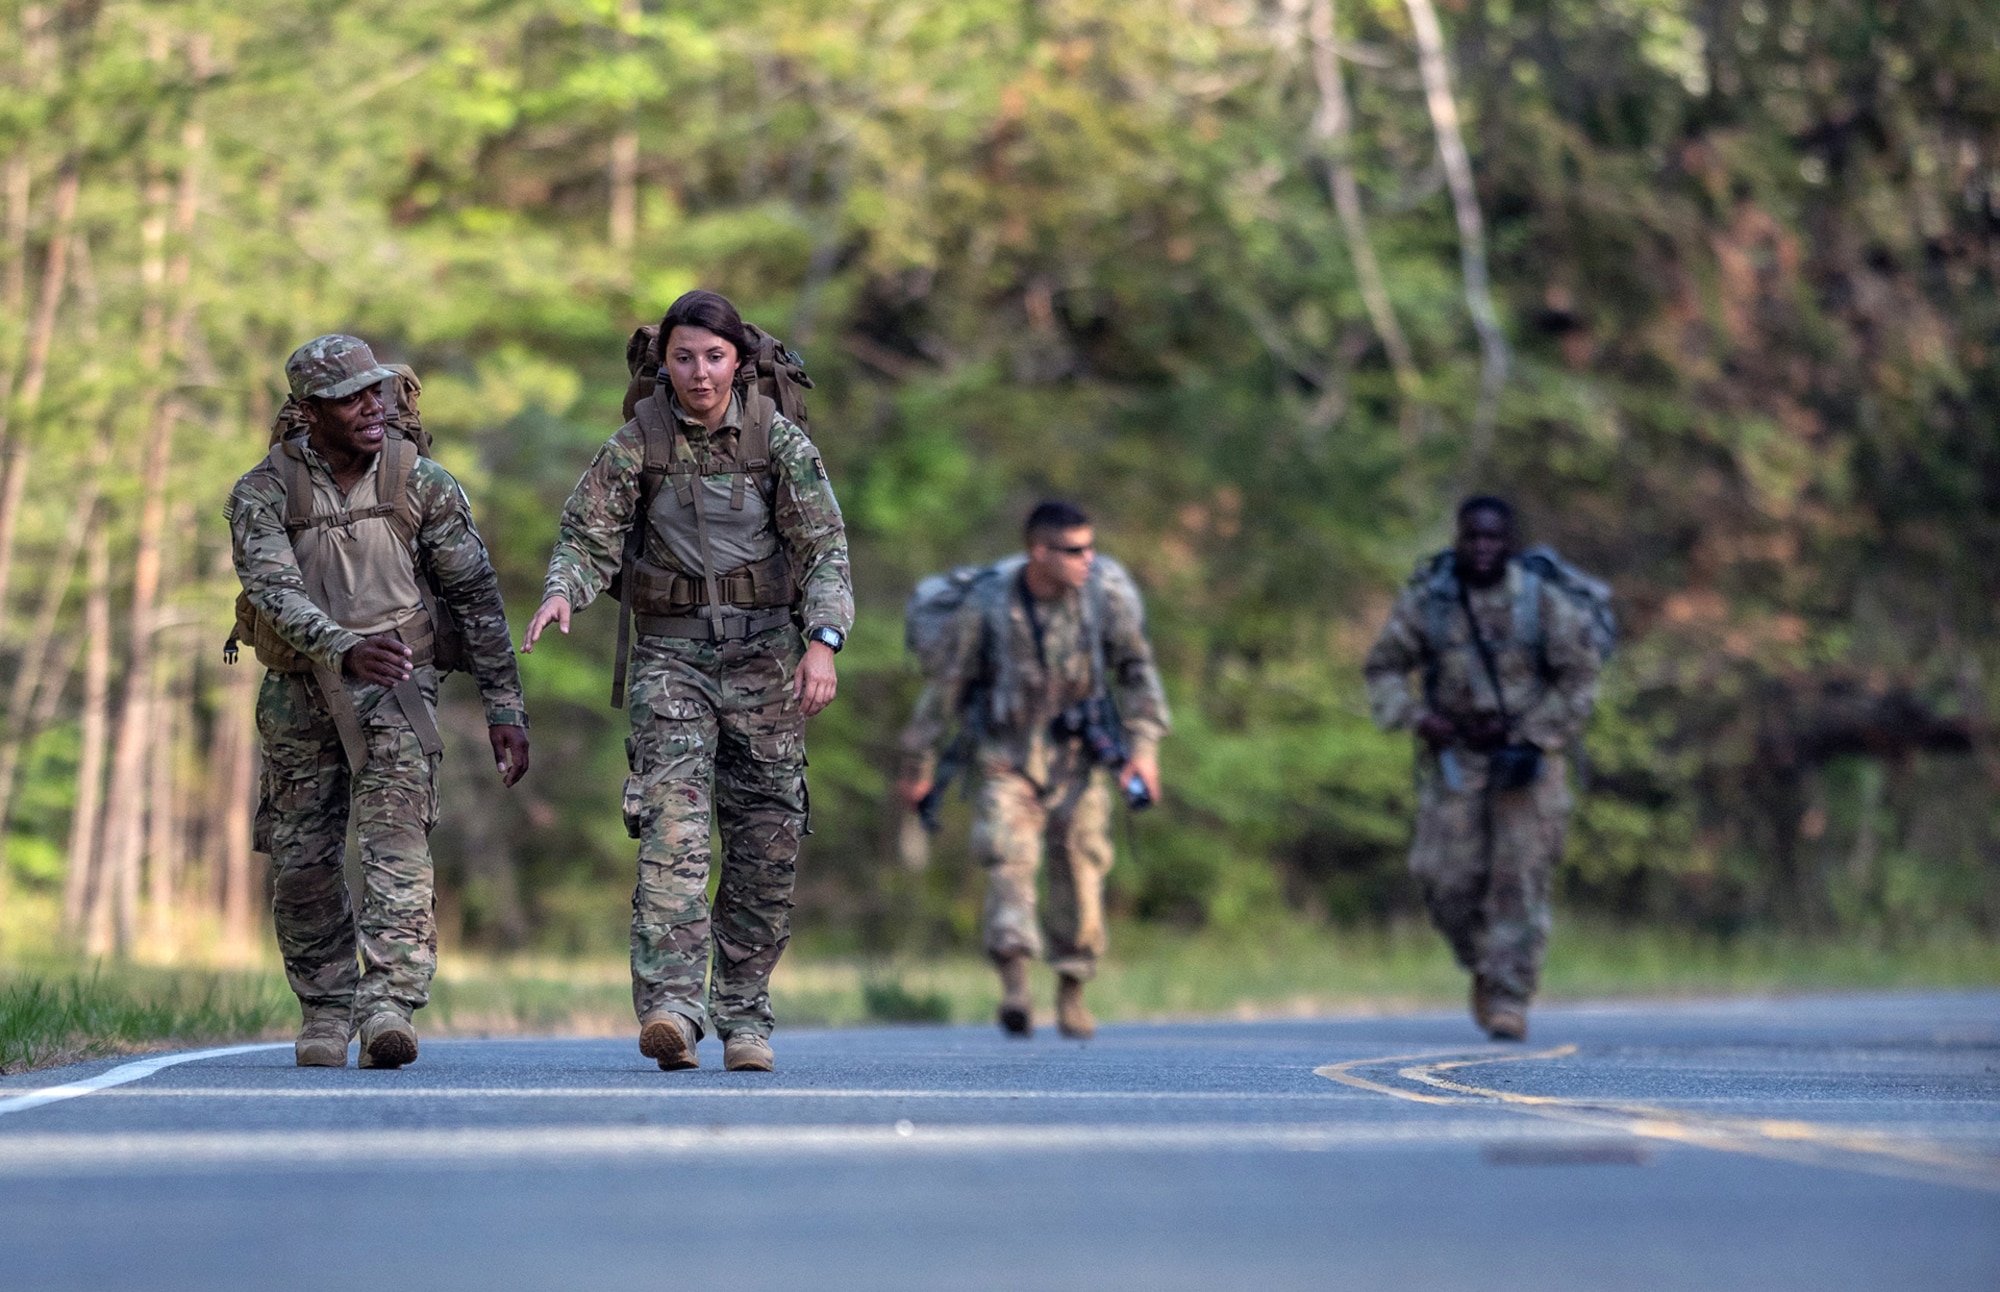 Airman 1st Class Franklin Harris (left) and Senior Airman Maygan Straight, both assigned to 1st Combat Camera Squadron, conduct the 10-mile road march part of the 2018 SPC Hilda I. Clayton Best Combat Camera Competition at Marine Corps Base Quantico, Va., May 3, 2018. The competition is an annual event open to all branches of the military, it's hosted by the 55th Signal Company (Combat Camera) in order to test the technical and tactical proficiencies of Defense Department combat photographers. (U.S. Army photo by Staff Sgt. Pablo N. Piedra)